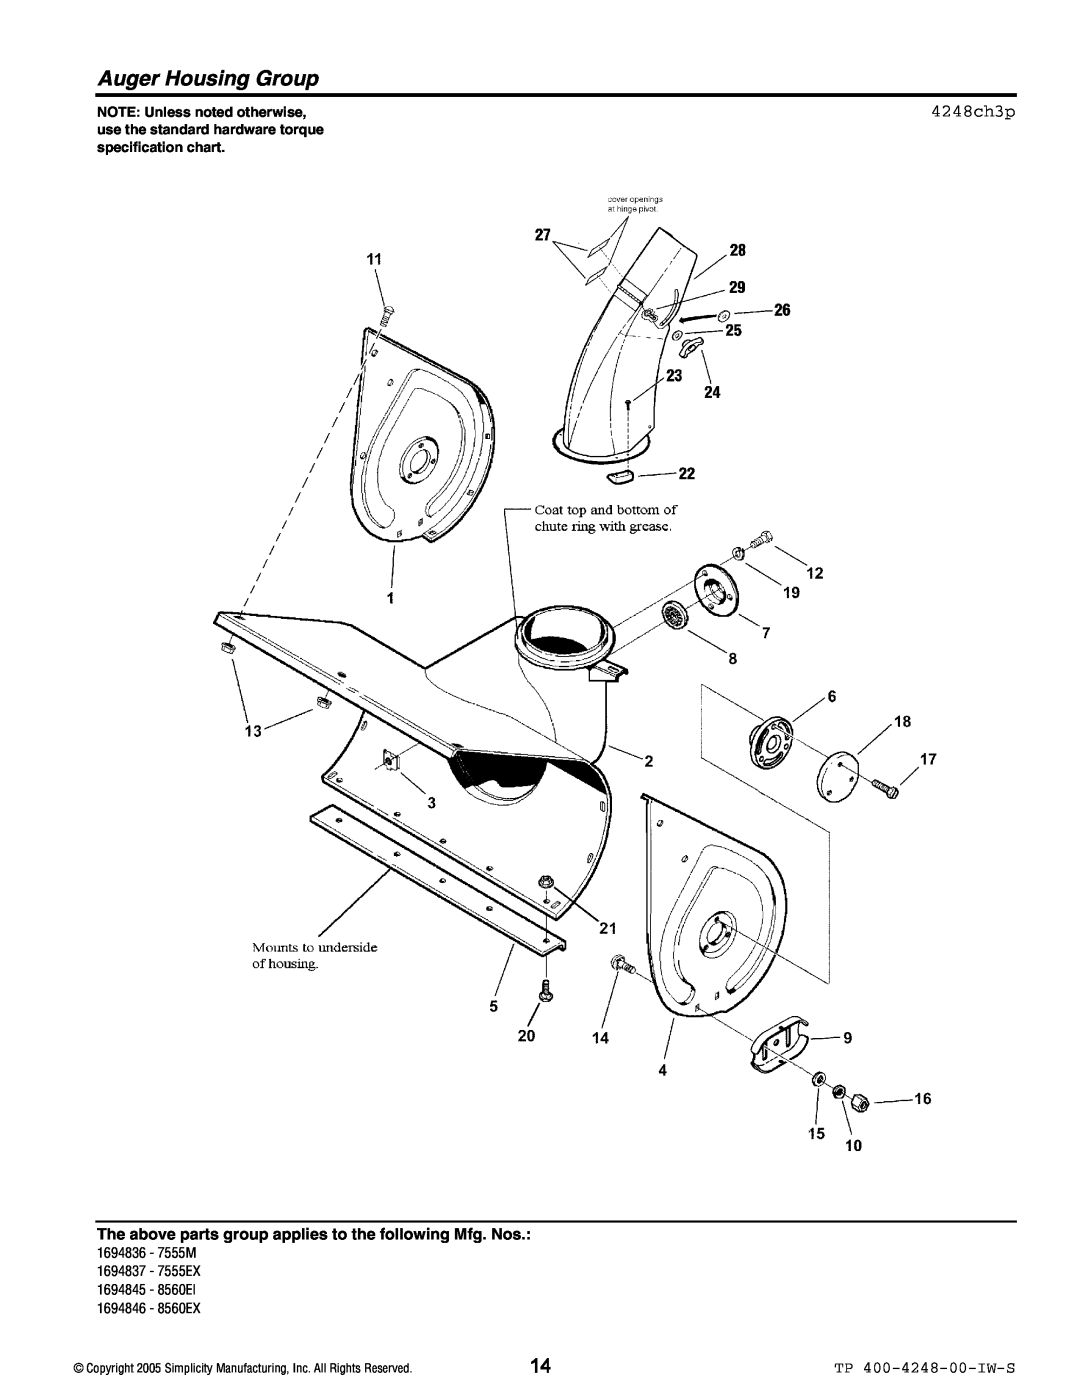 Simplicity 8660EX, 7555EX, 7555M, 8660EI Auger Housing Group, 4248ch3p, TP 400-4248-00-IW-S, NOTE: Unless noted otherwise 